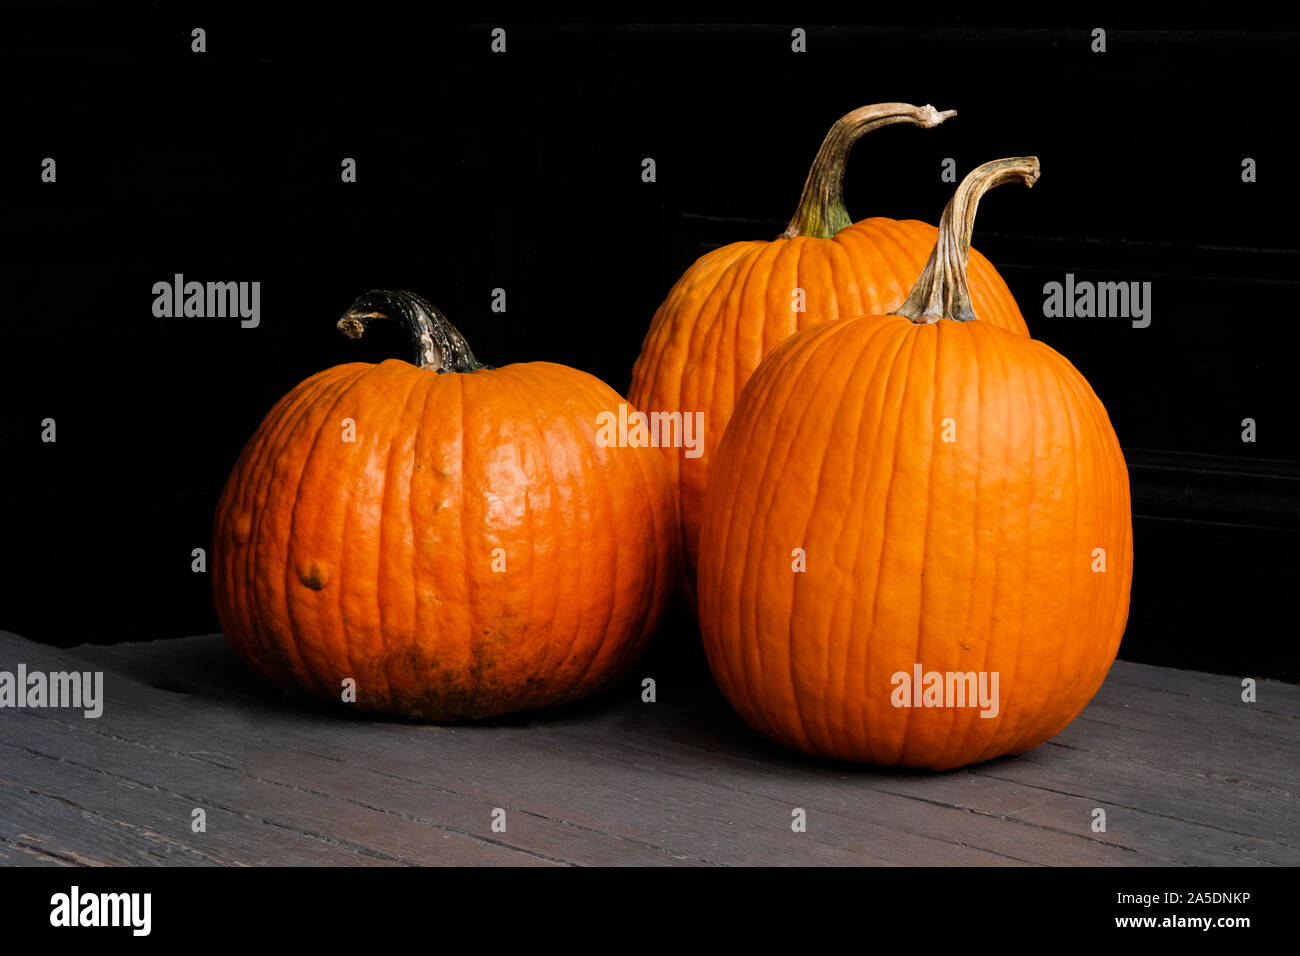 Three orange pumpkins on a grey foreground and black background, copy space around the pumpkins, landscape format Stock Photo